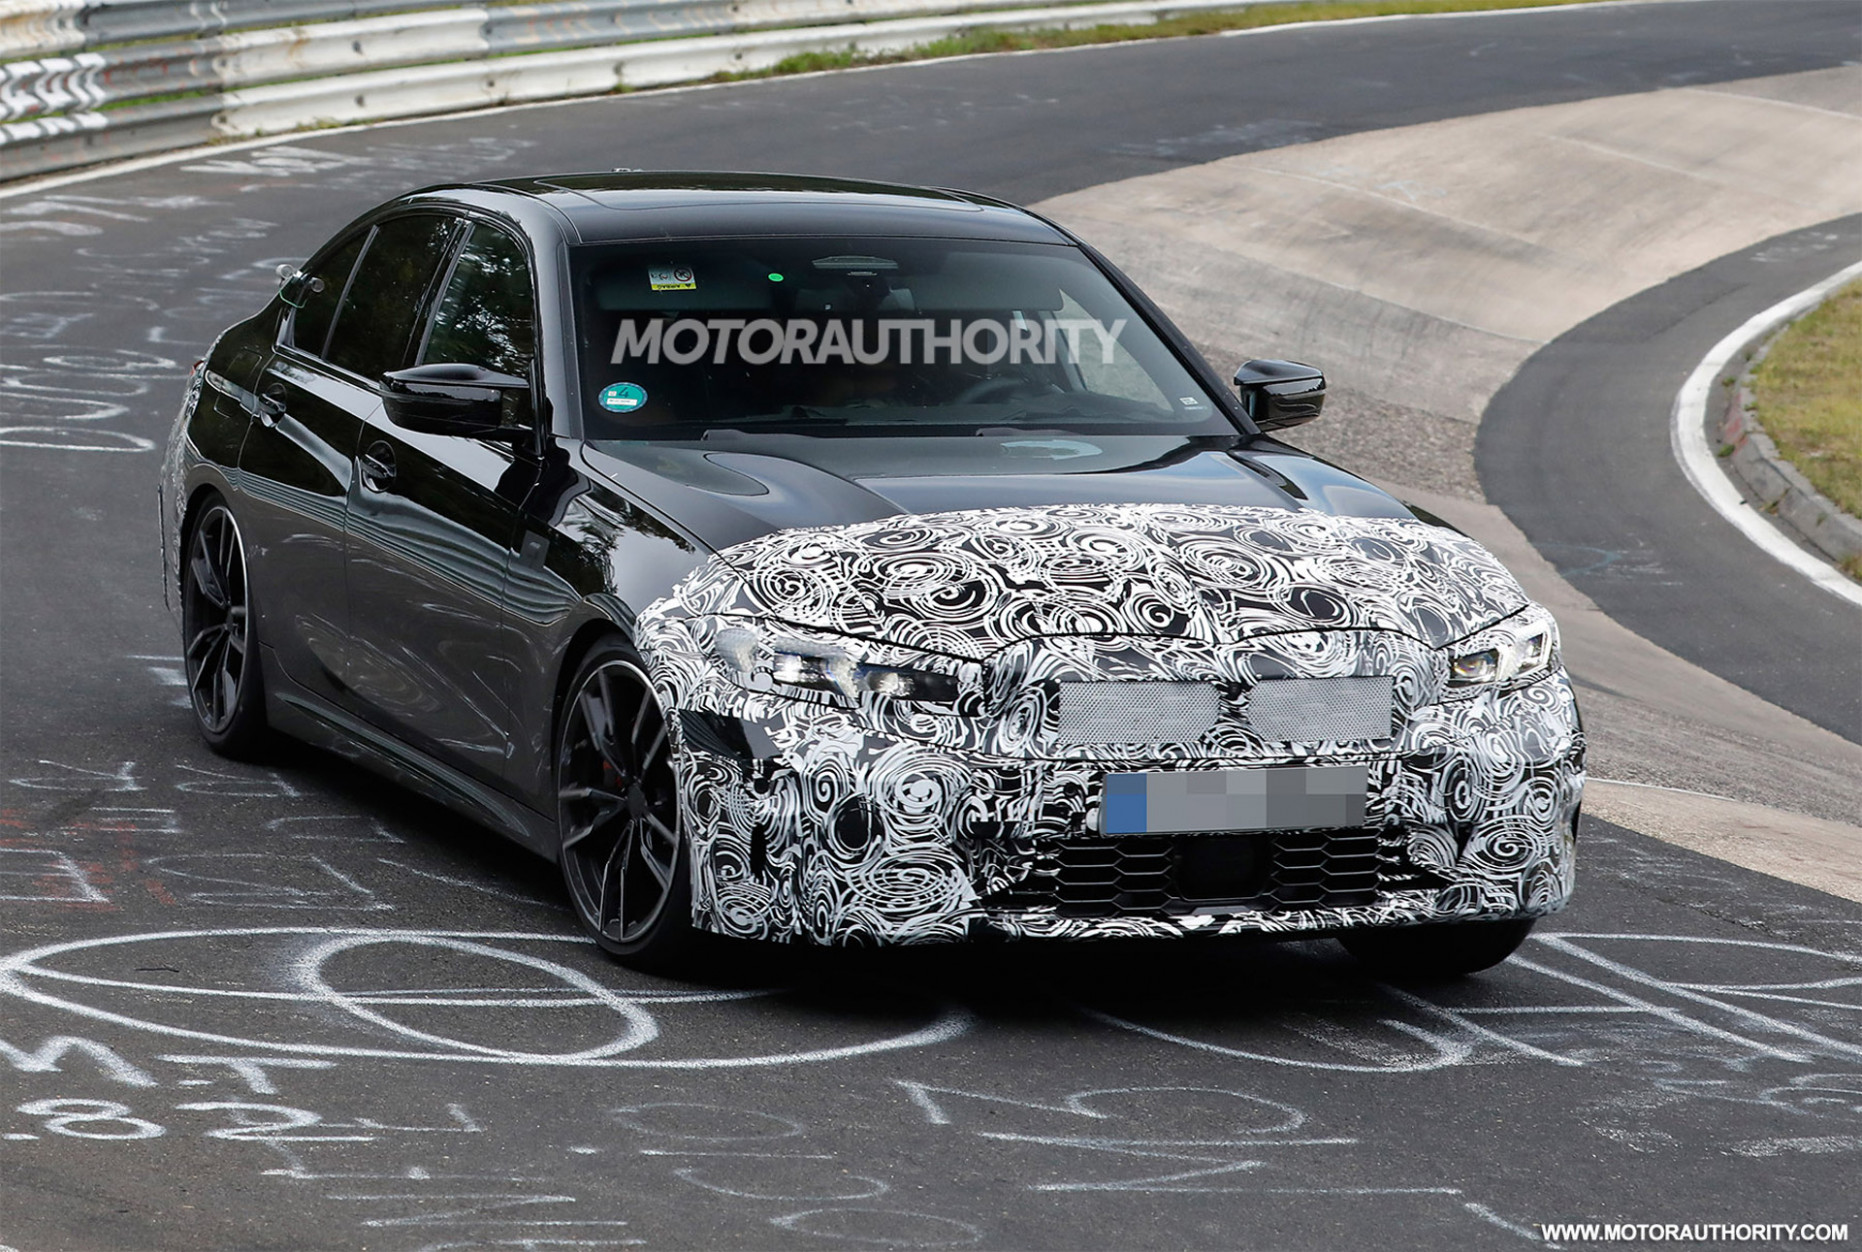 12 BMW 12-Series spy shots and video: Mid-cycle update on the way - Spy Shots BMW 3 Series